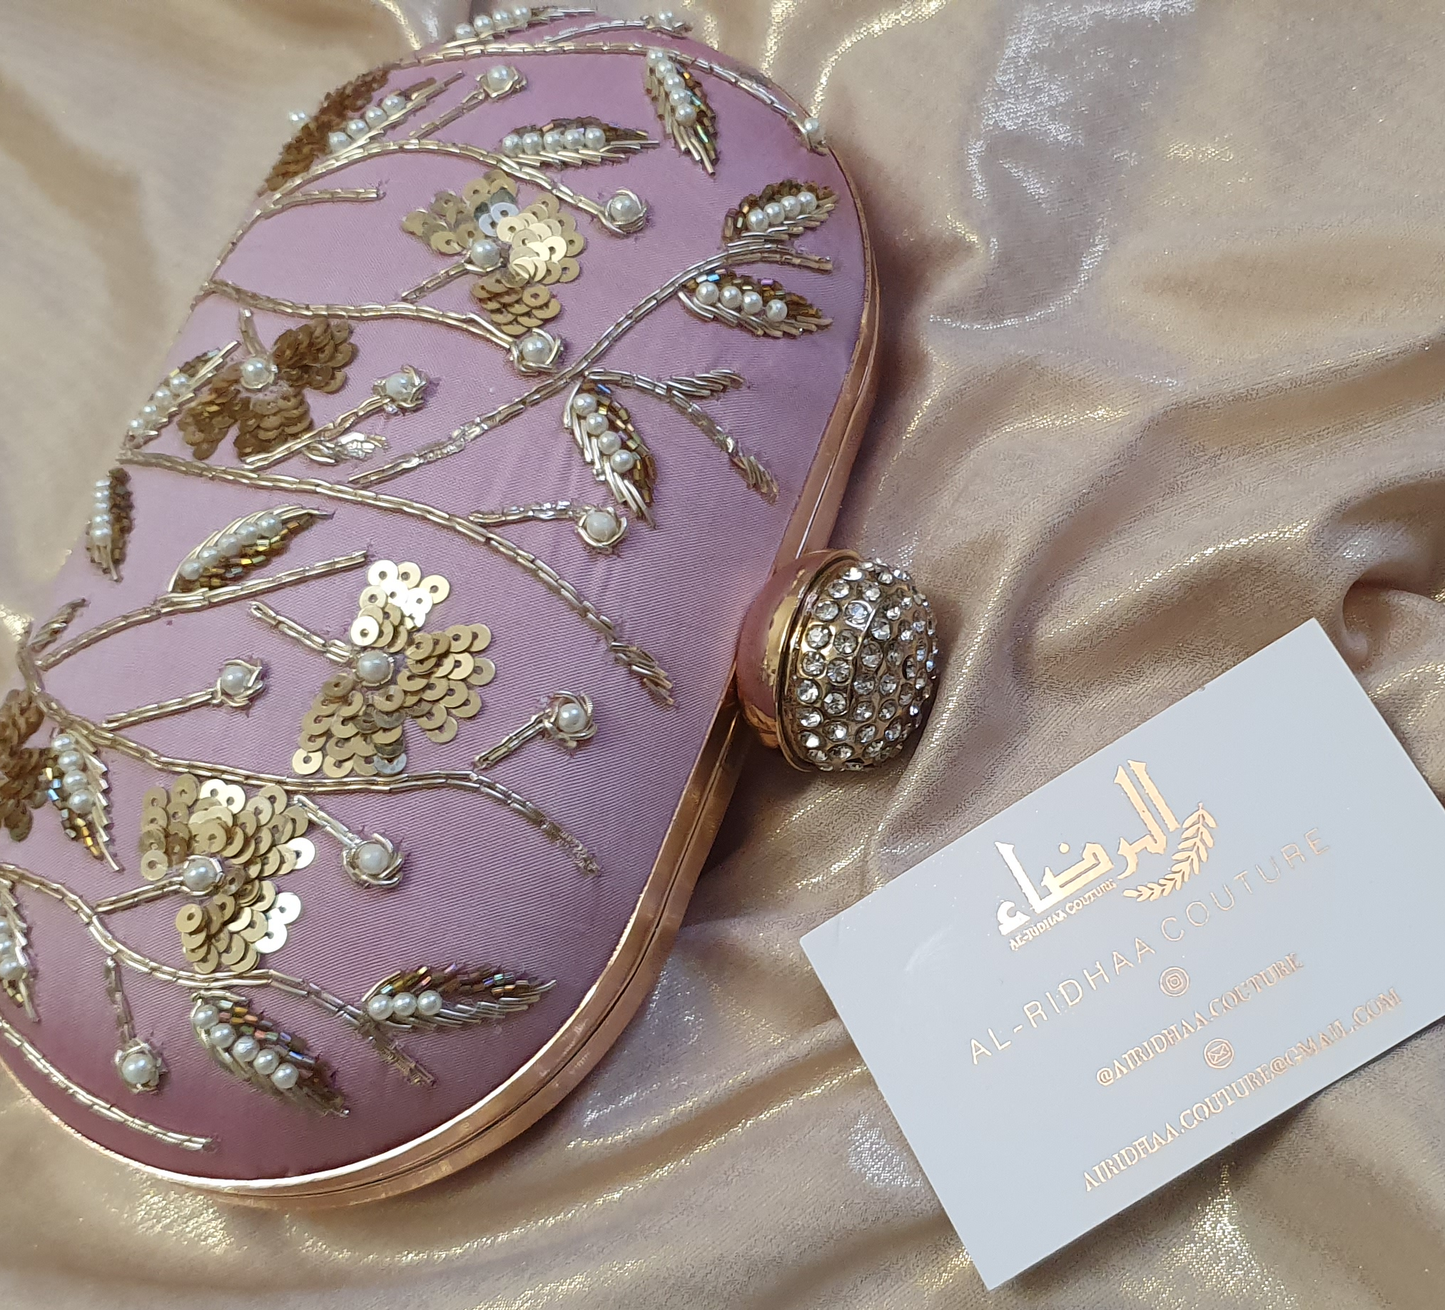 Small Oval Embroidered Clutch